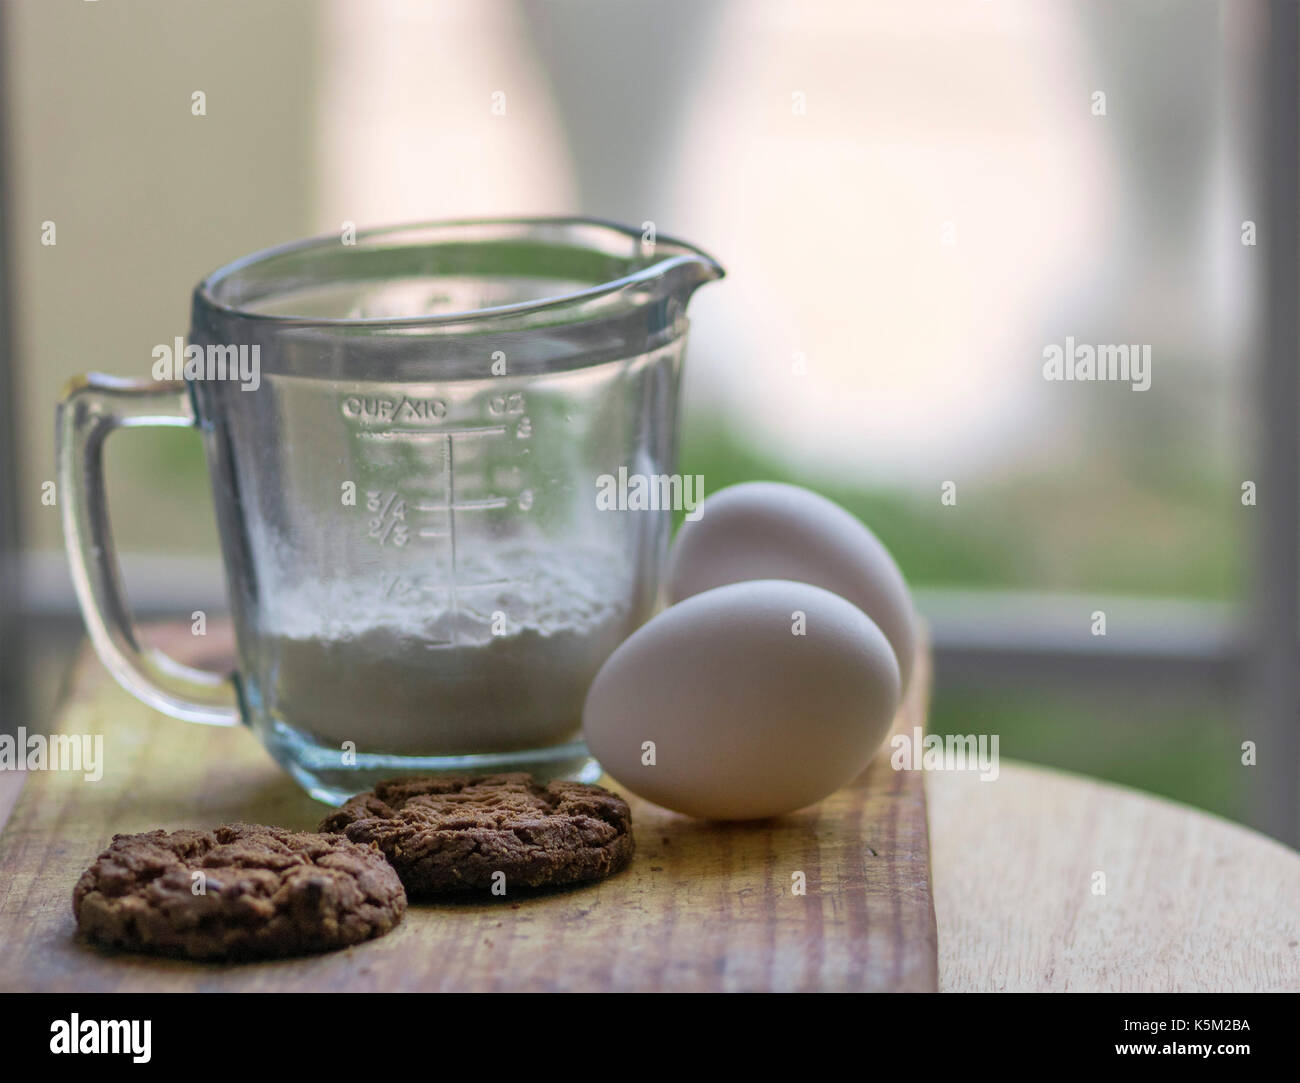 https://c8.alamy.com/comp/K5M2BA/a-glass-measurement-cup-two-eggs-and-baked-brown-chocolate-cookies-K5M2BA.jpg